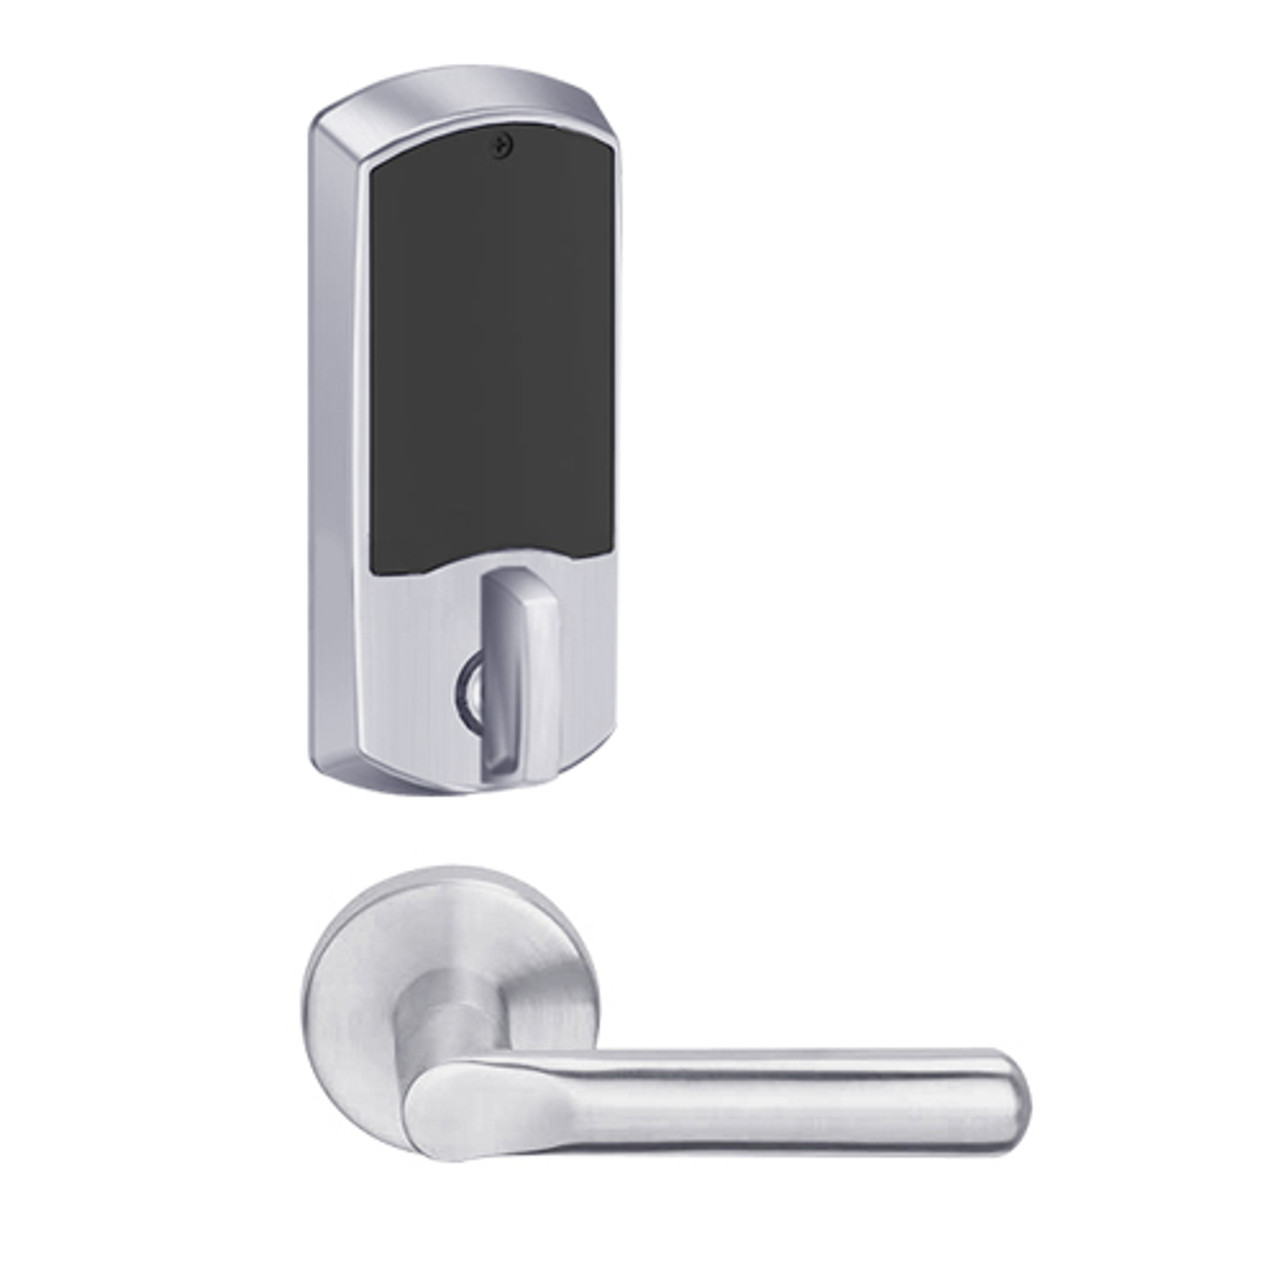 LEMD-GRW-J-18-626-00C Schlage Privacy/Apartment Wireless Greenwich Mortise Deadbolt Lock with LED and 18 Lever Prepped for FSIC in Satin Chrome